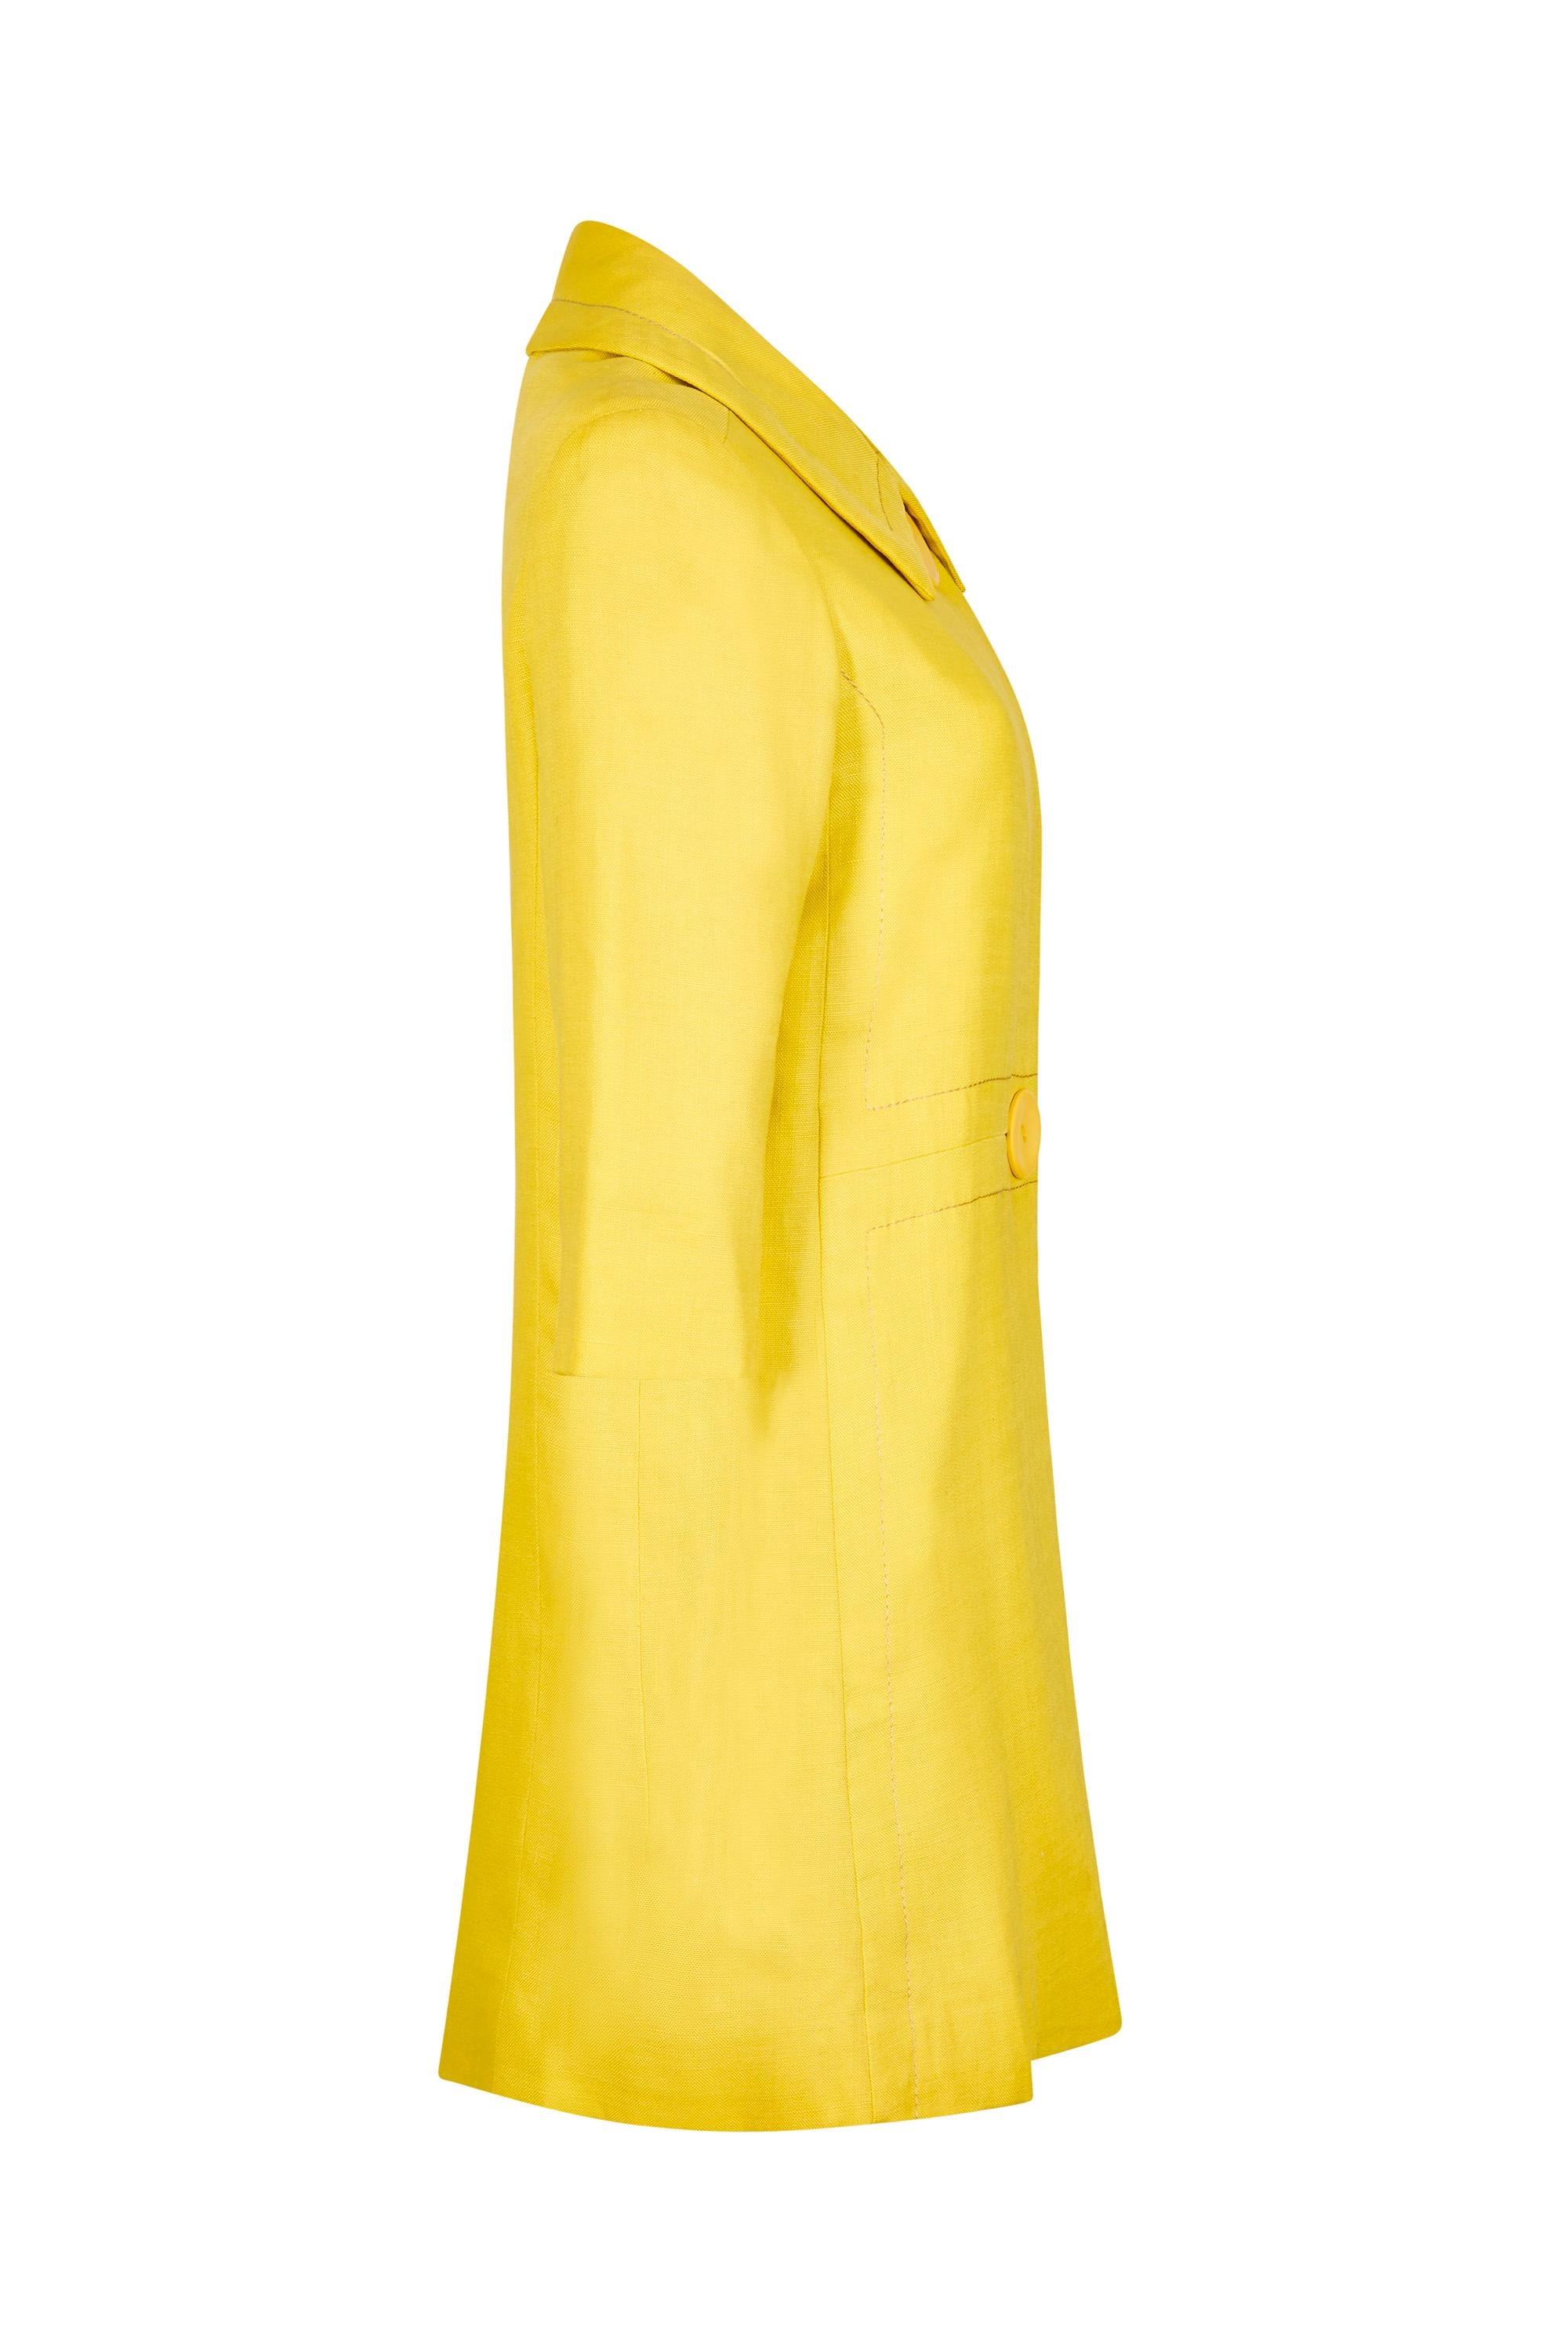 This chic 1960s citrus yellow Mod style swing coat is by Christian Dior London and is beautifully cut in excellent vintage condition. Straight cut and comprised of a thick silk blend linen fabric and fully lined in matching yellow silk, it features